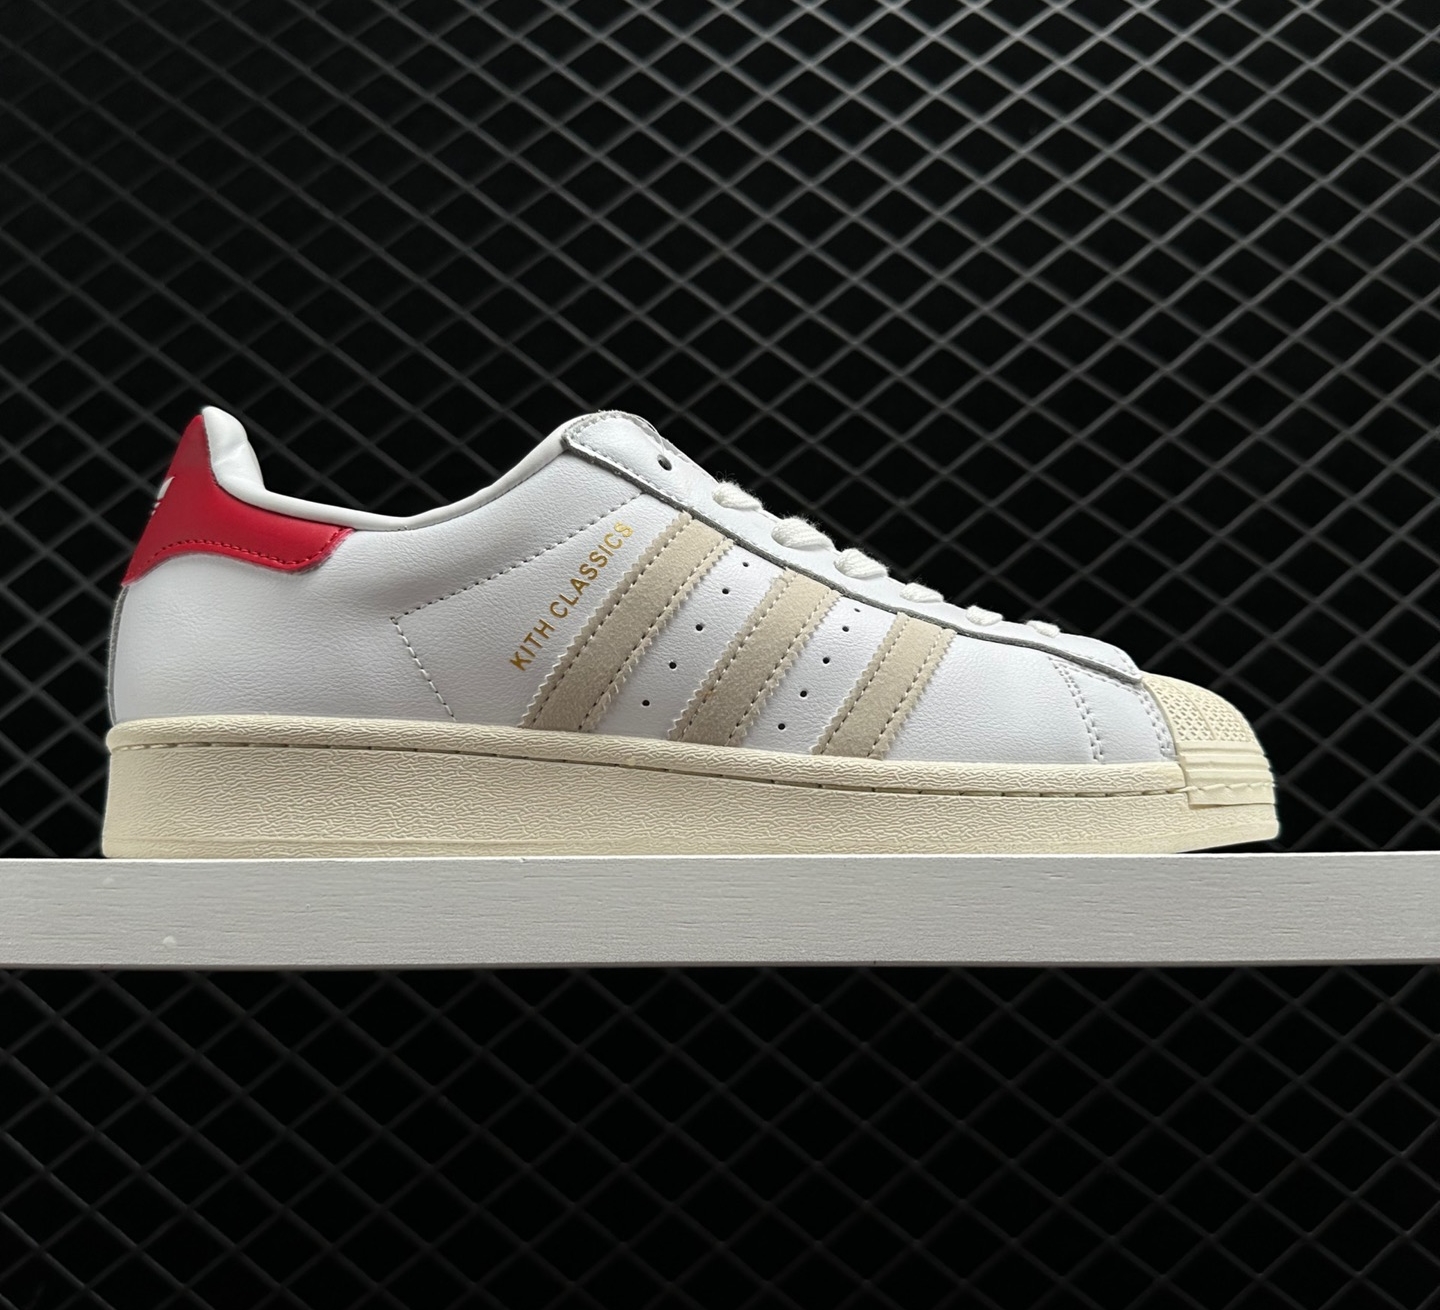 Adidas Kith x Superstar 'Classics Program - White Red' GY2543 - Limited Edition Collaboration